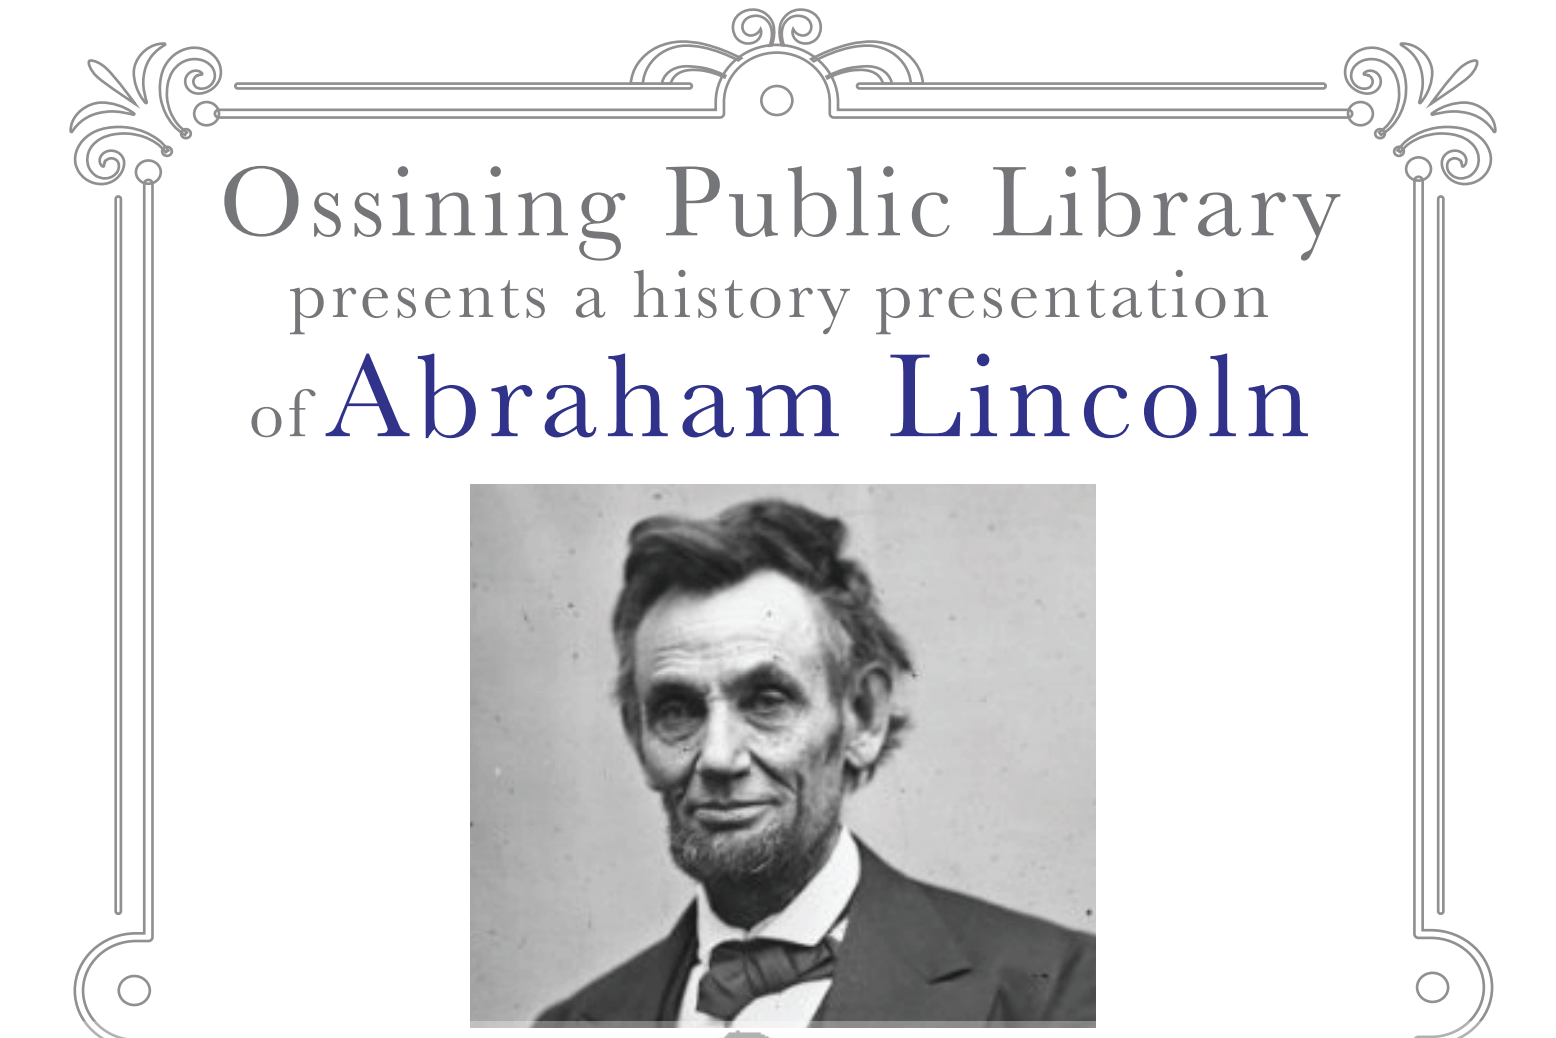 Ossining Public Library presents a history presentation ofAbraham Lincoln